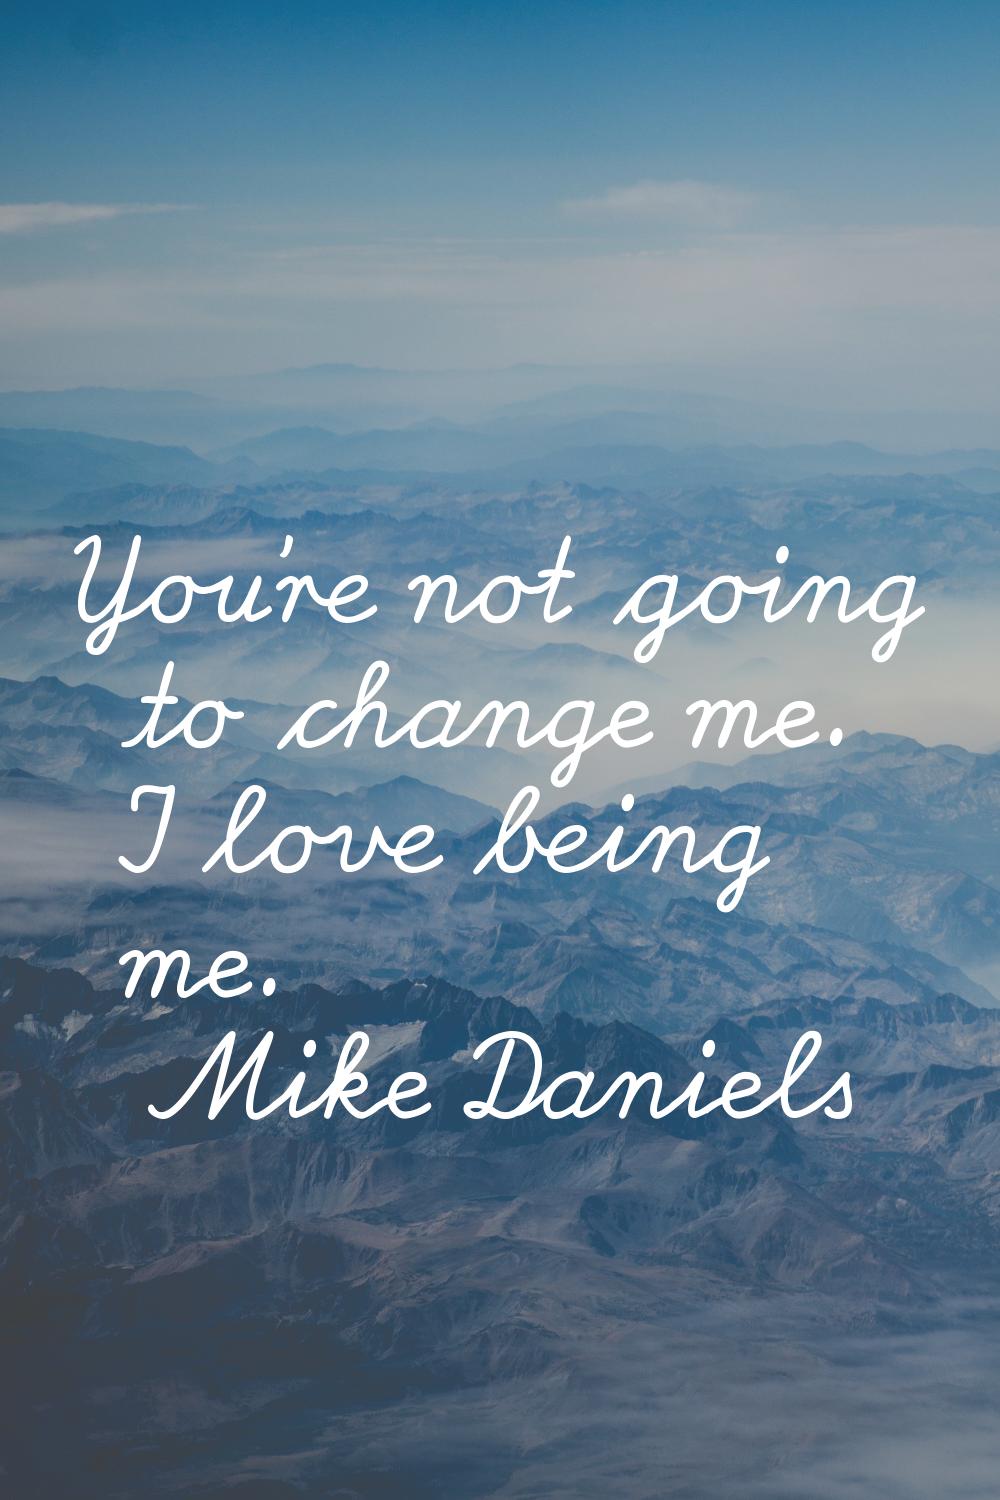 You're not going to change me. I love being me.